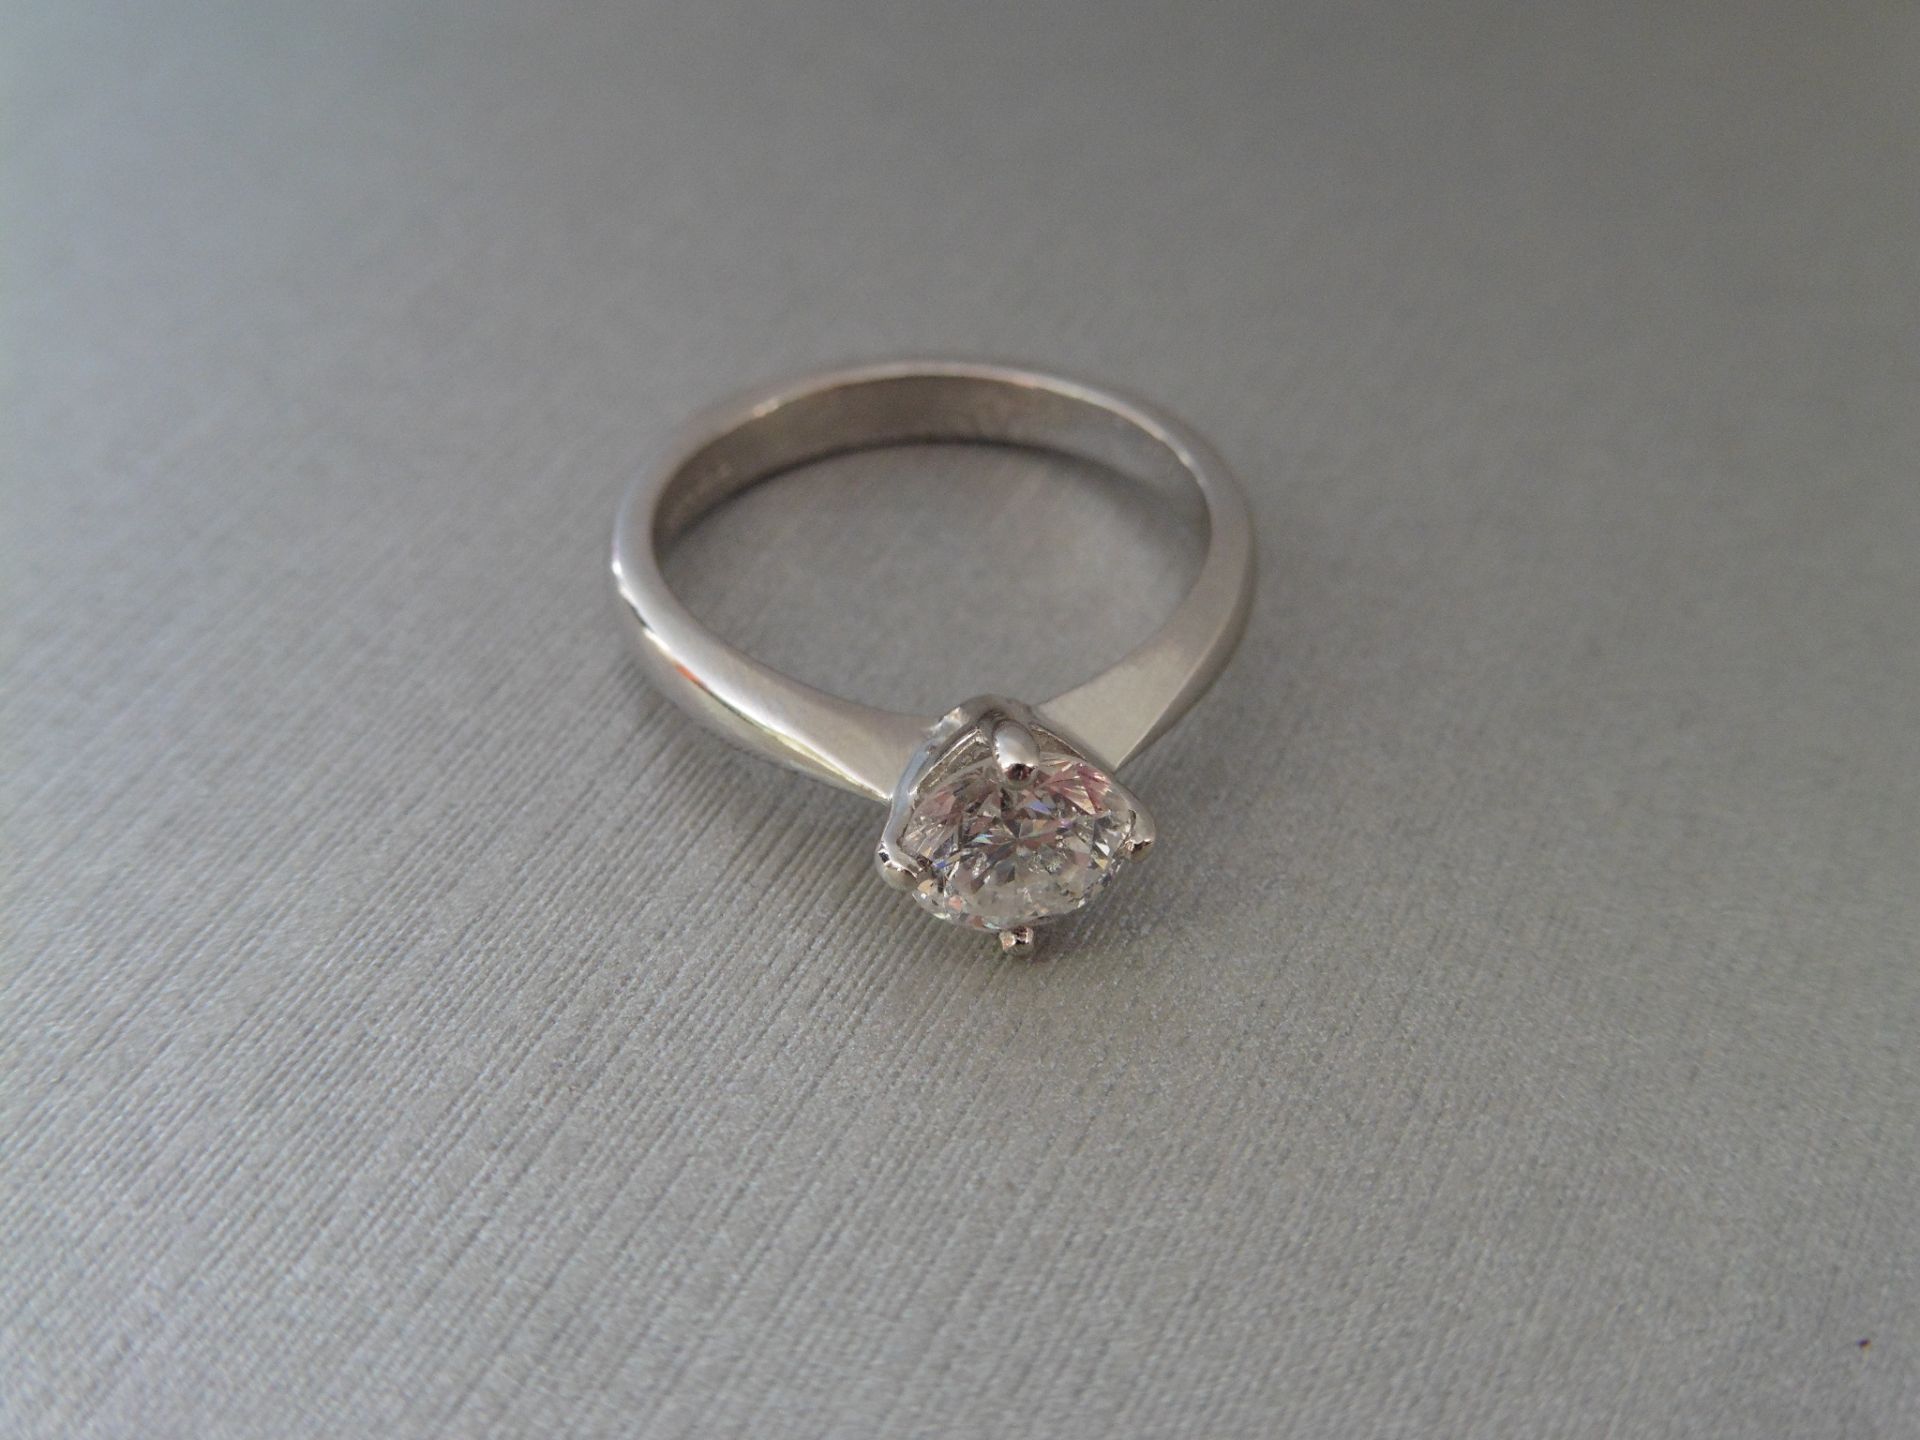 0.91ct Diamond solitaire ring with a brilliant cut diamond, H colour and Si1 clarity. Set in - Image 2 of 4